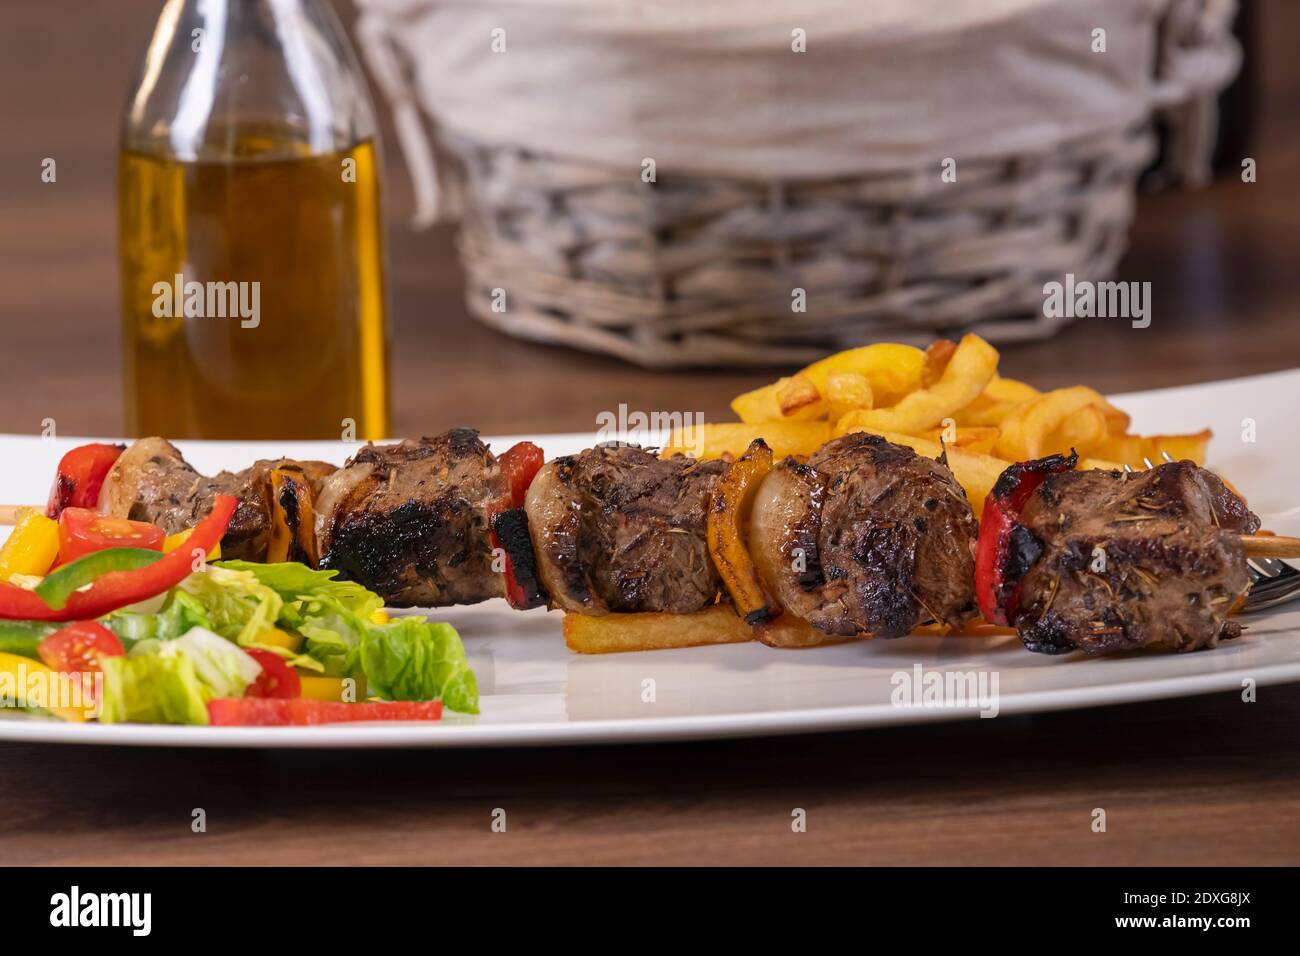 Juicy roasted beef skewer with freshly cut vegetables and french fries on a plate with an out of focus bottle of oil at the back. Selective focus. Stock Photo